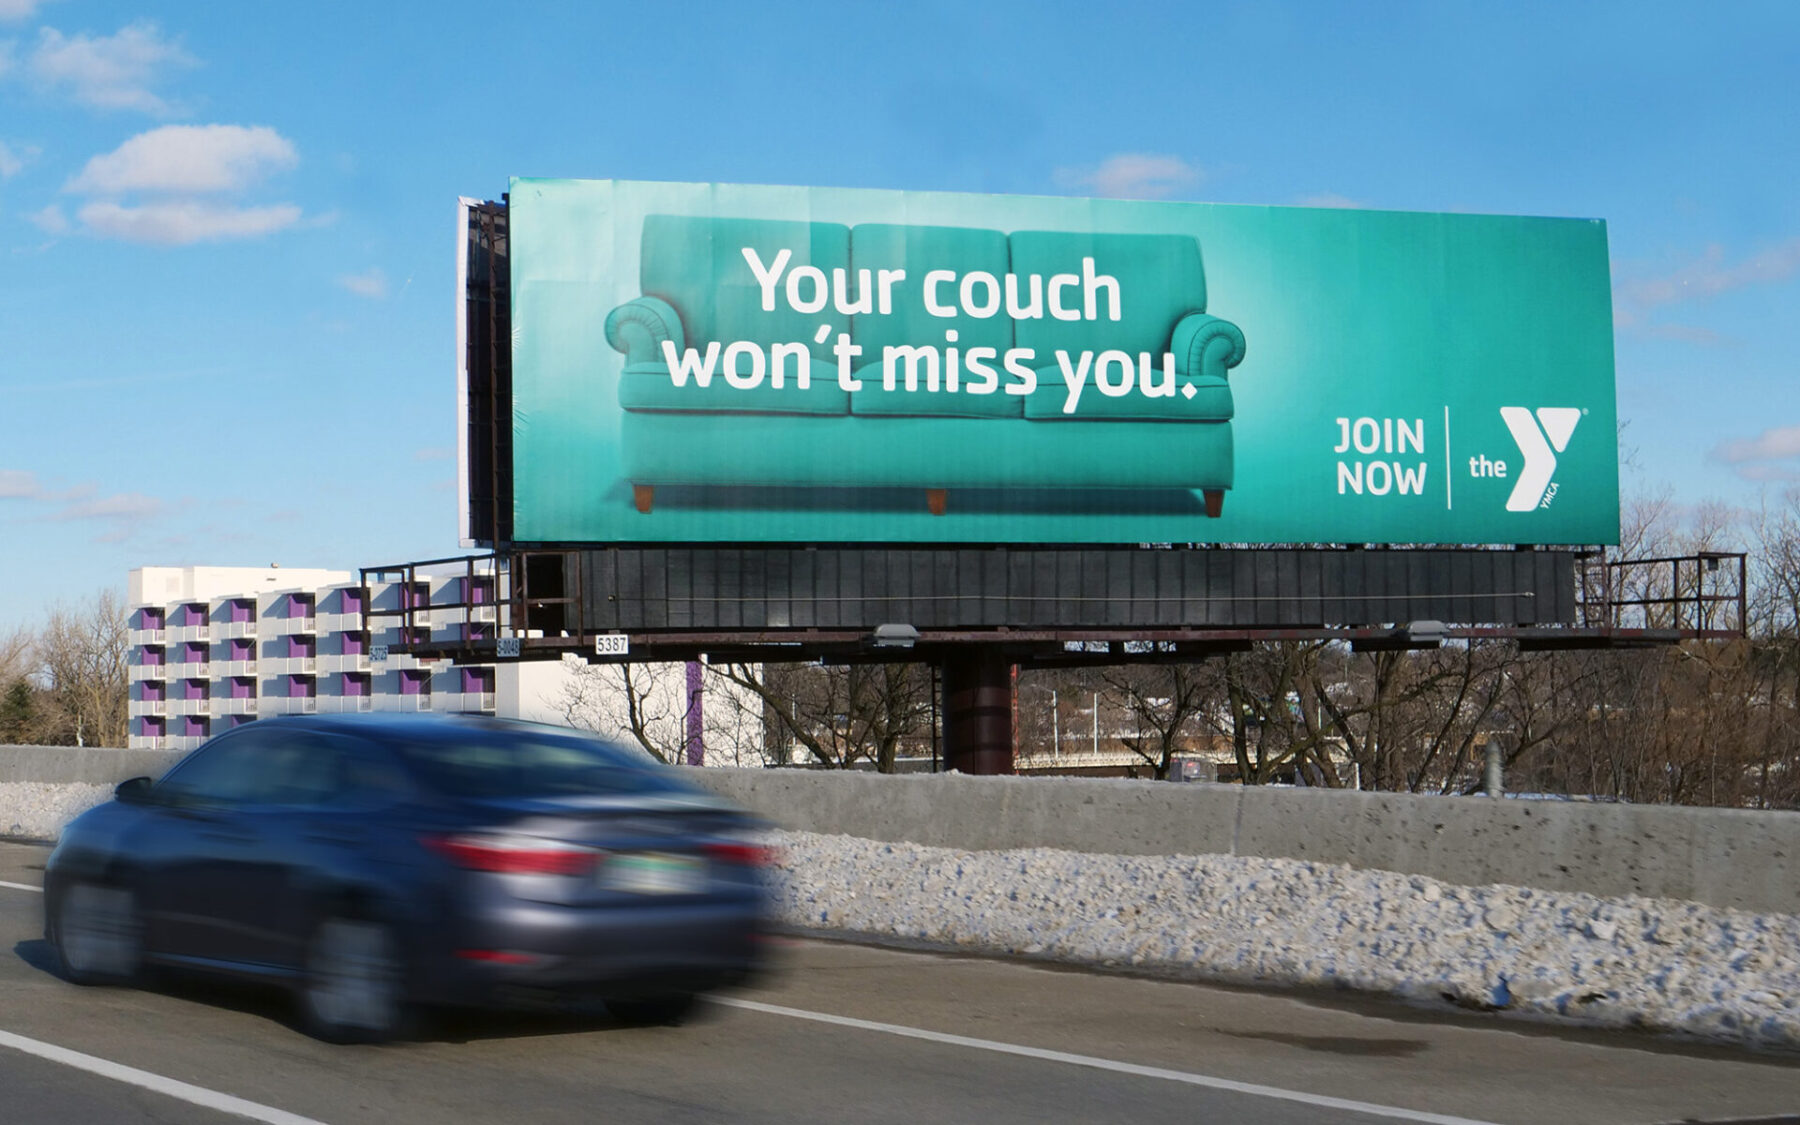 Out of home bulletin design with a couch and the headline "Your couch won't miss you."